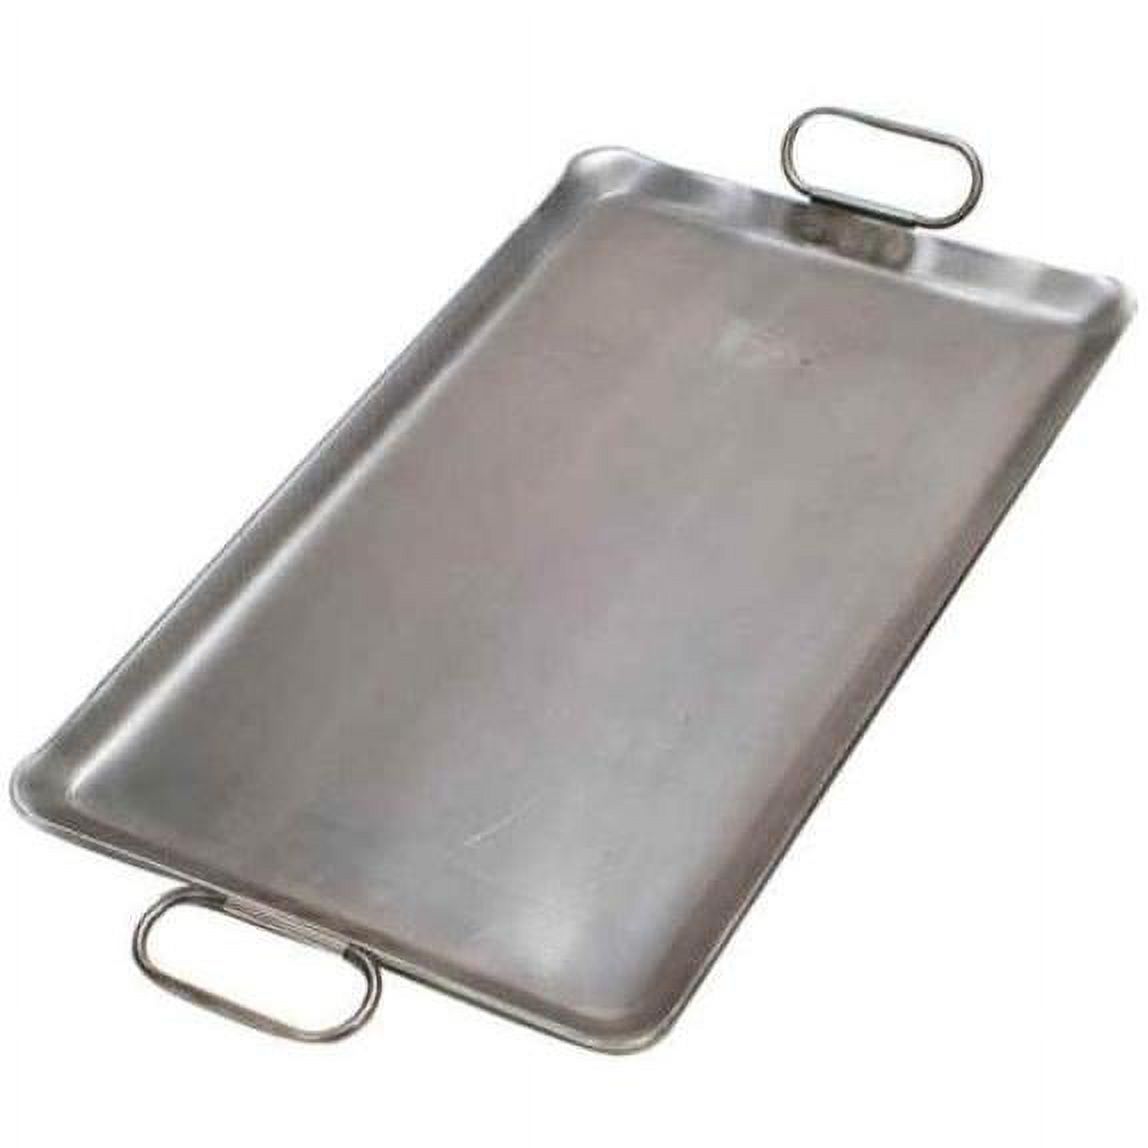 Rocky Mountain Chef King 12 X 20 Inch Steel Griddle